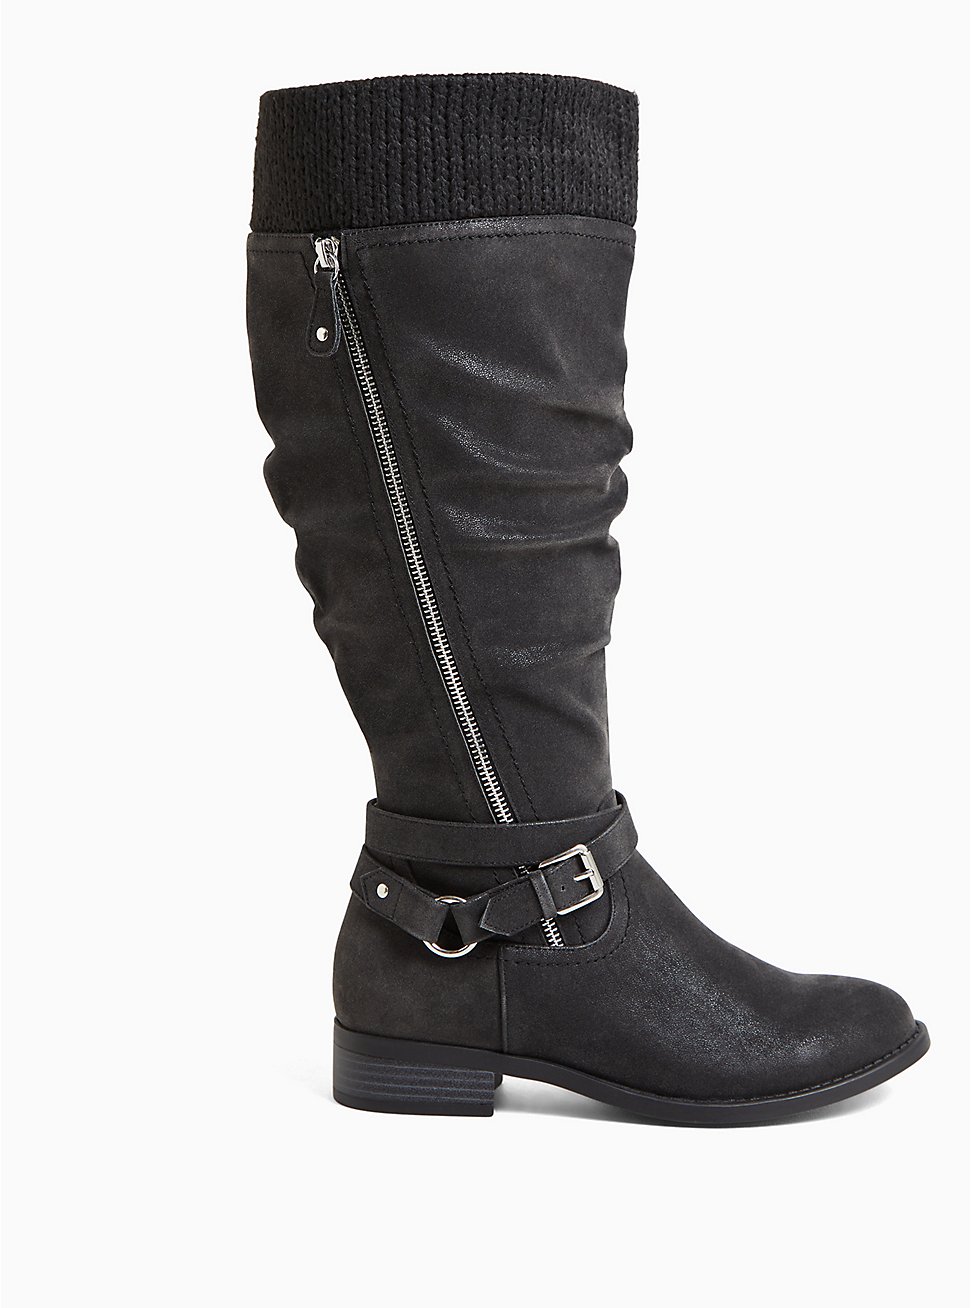 Oiled Sweater Trimmed Knee-High Boot (WW), BLACK, hi-res